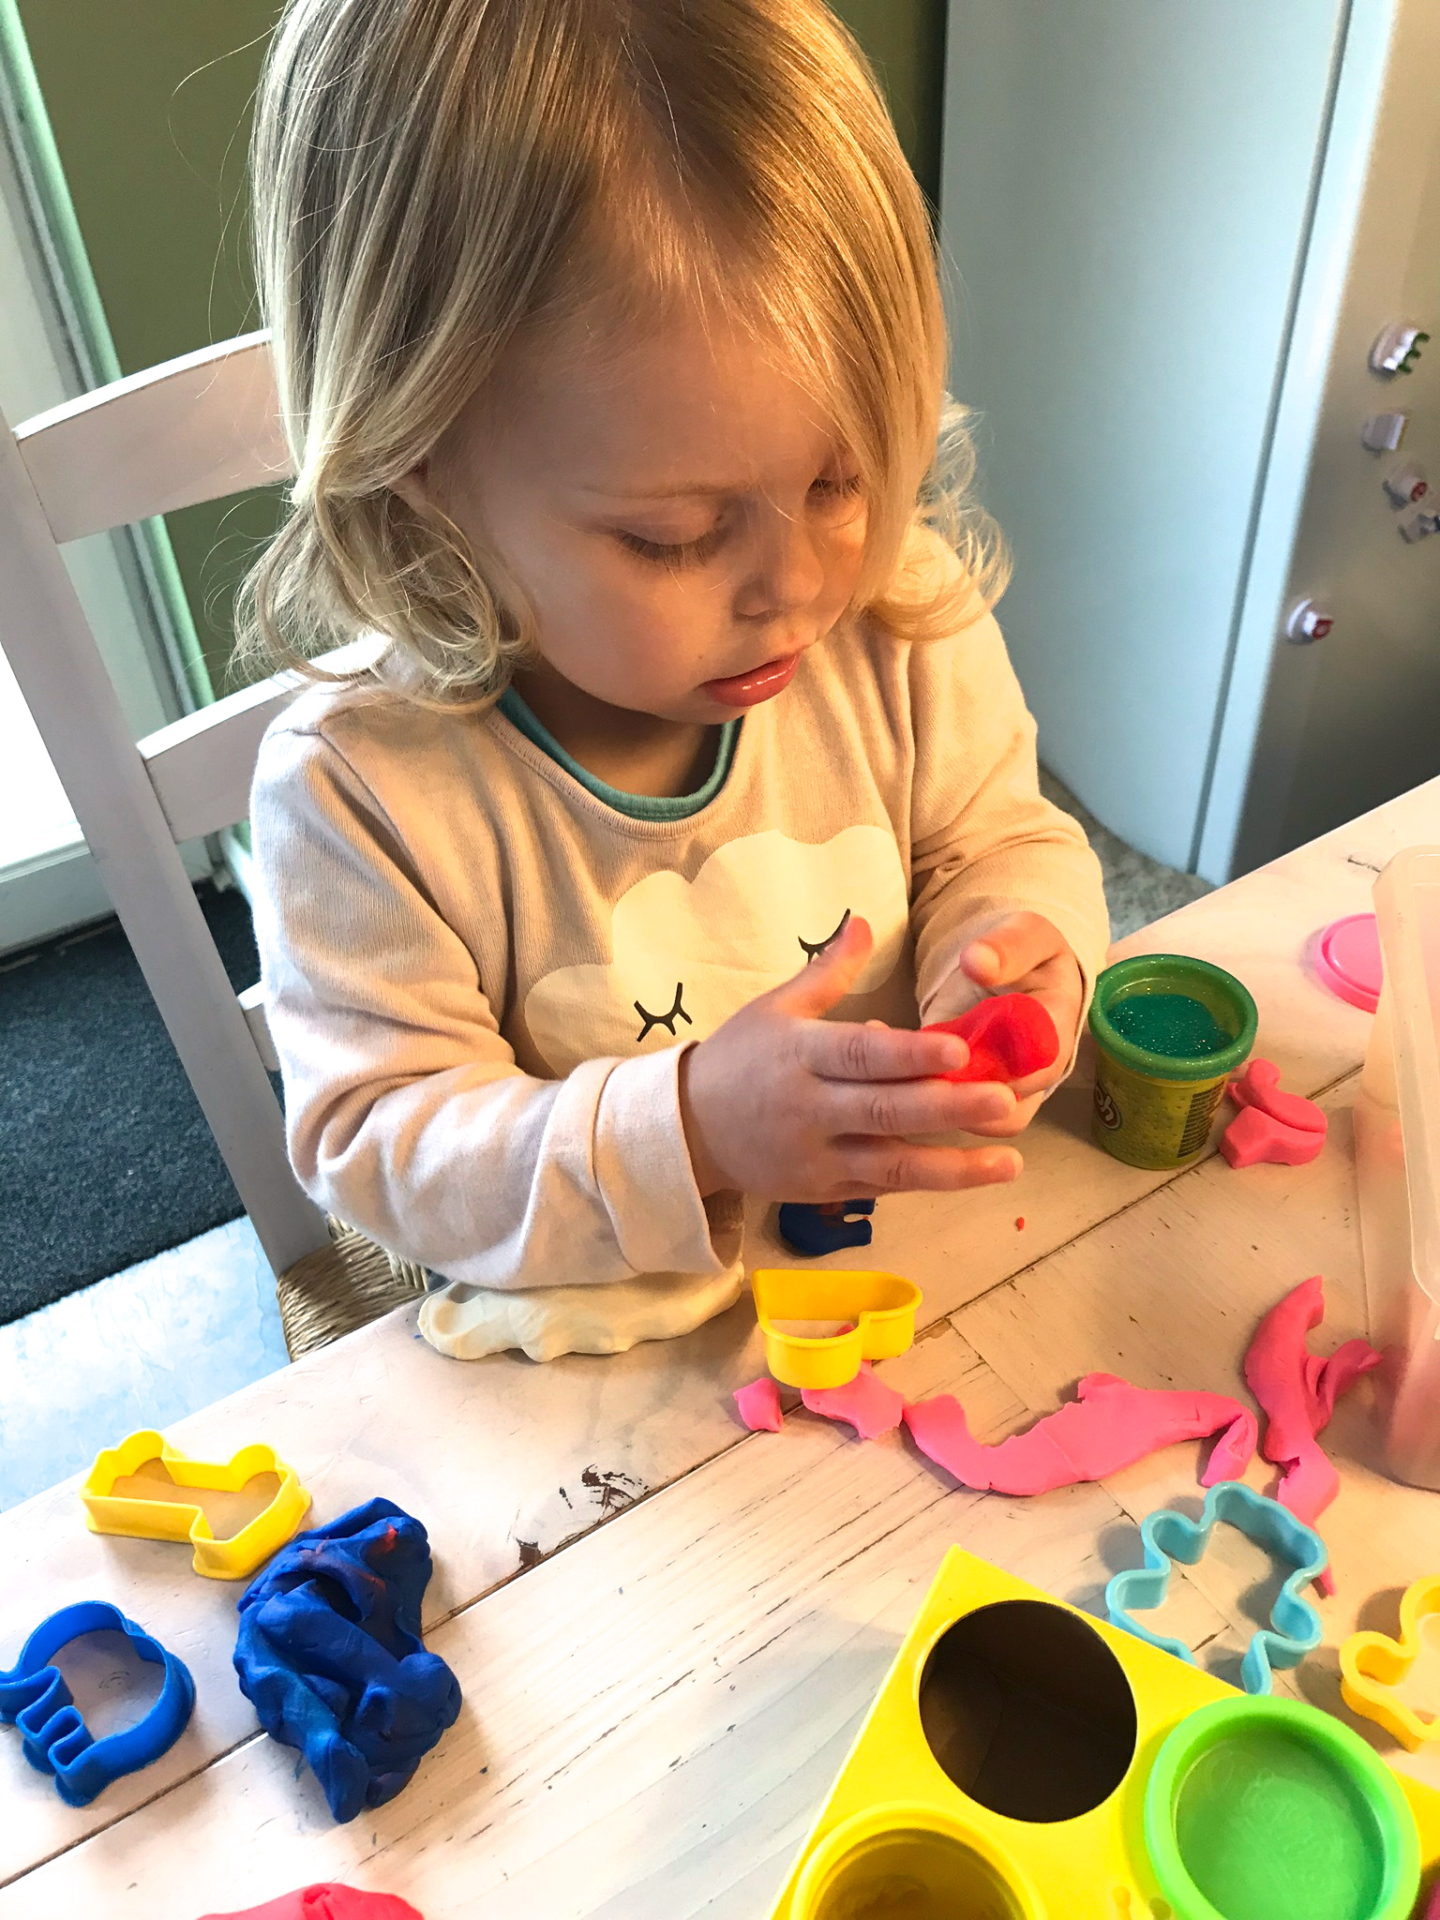 Two year old sitting at a table, playing with Play Doh